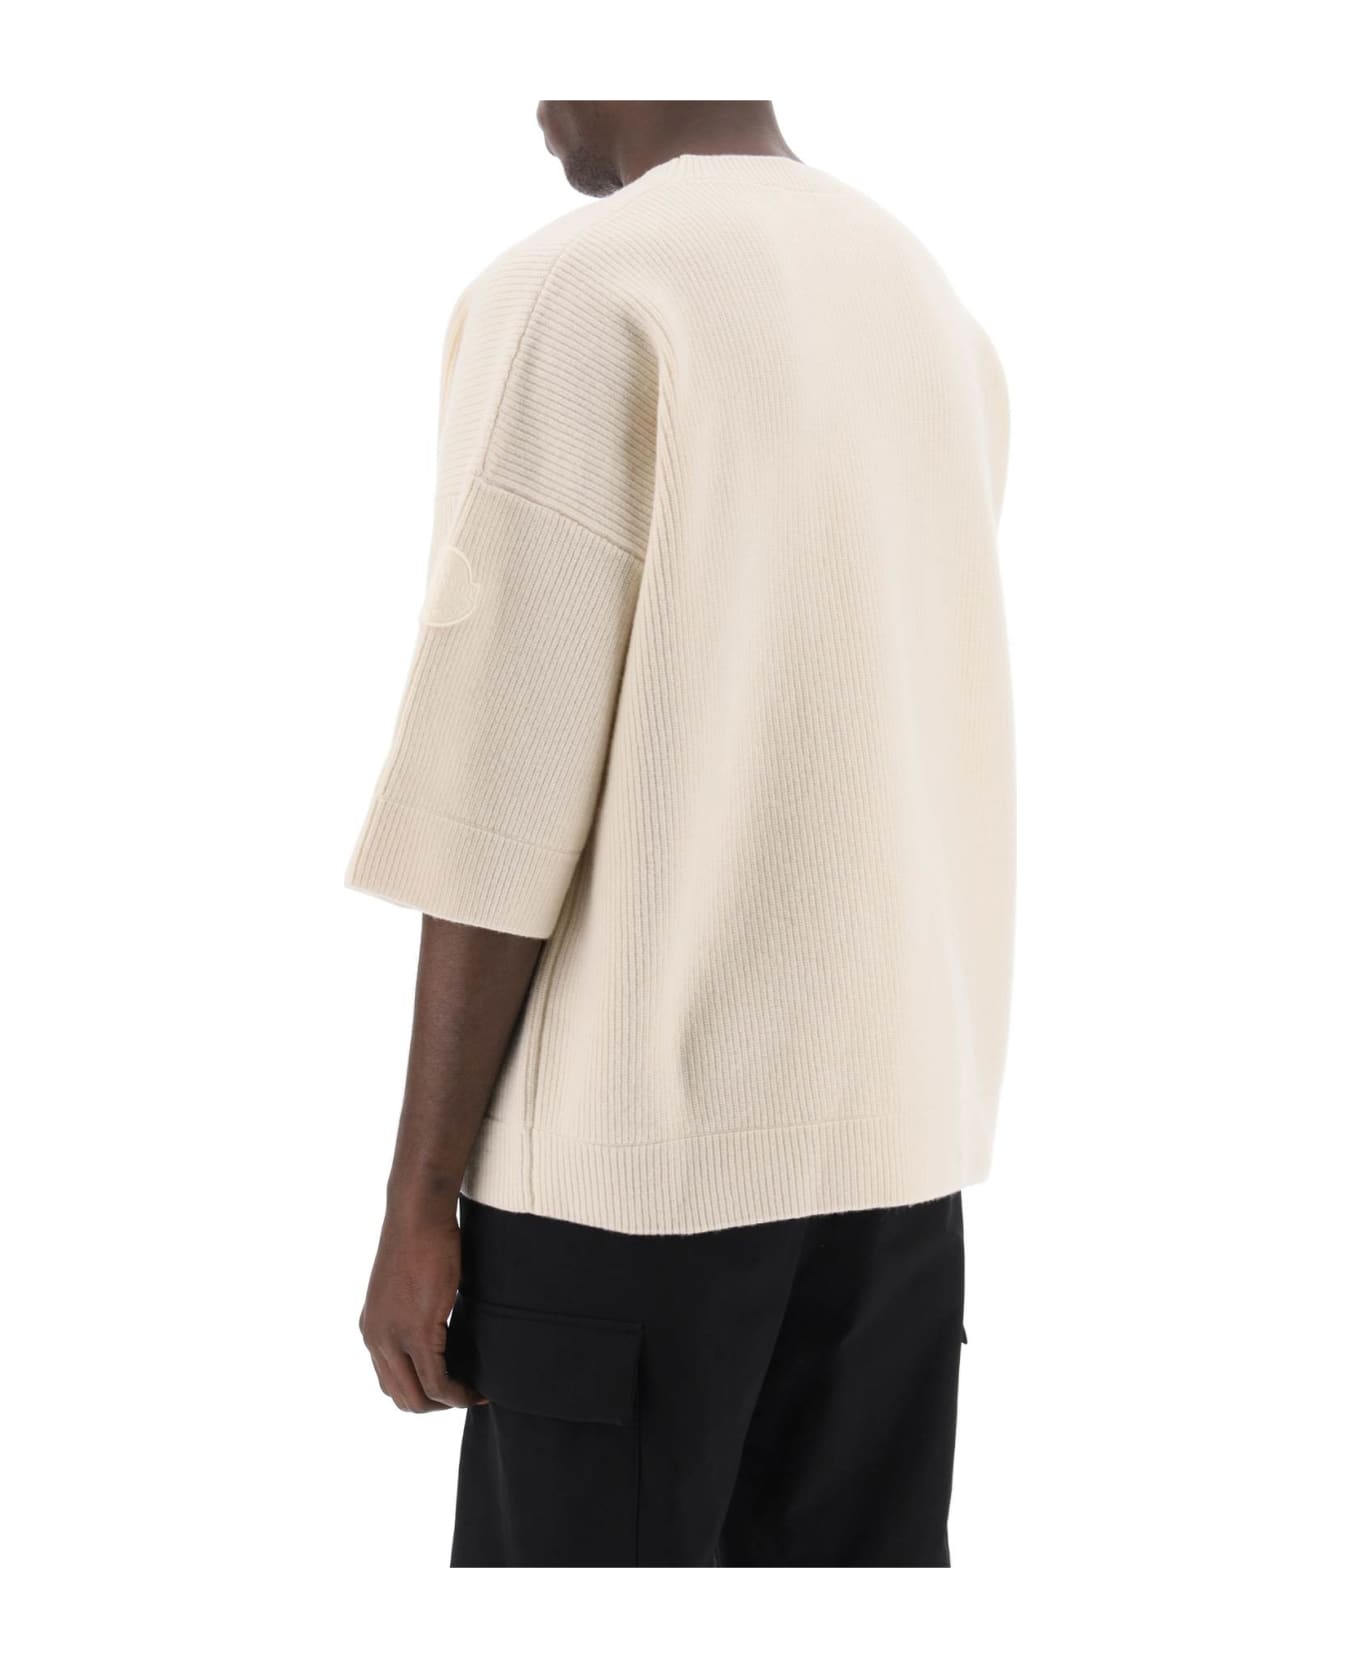 Moncler Genius Moncler X Roc Nation Designed By Jay-z - Virgin Wool Crew-neck Sweater - White